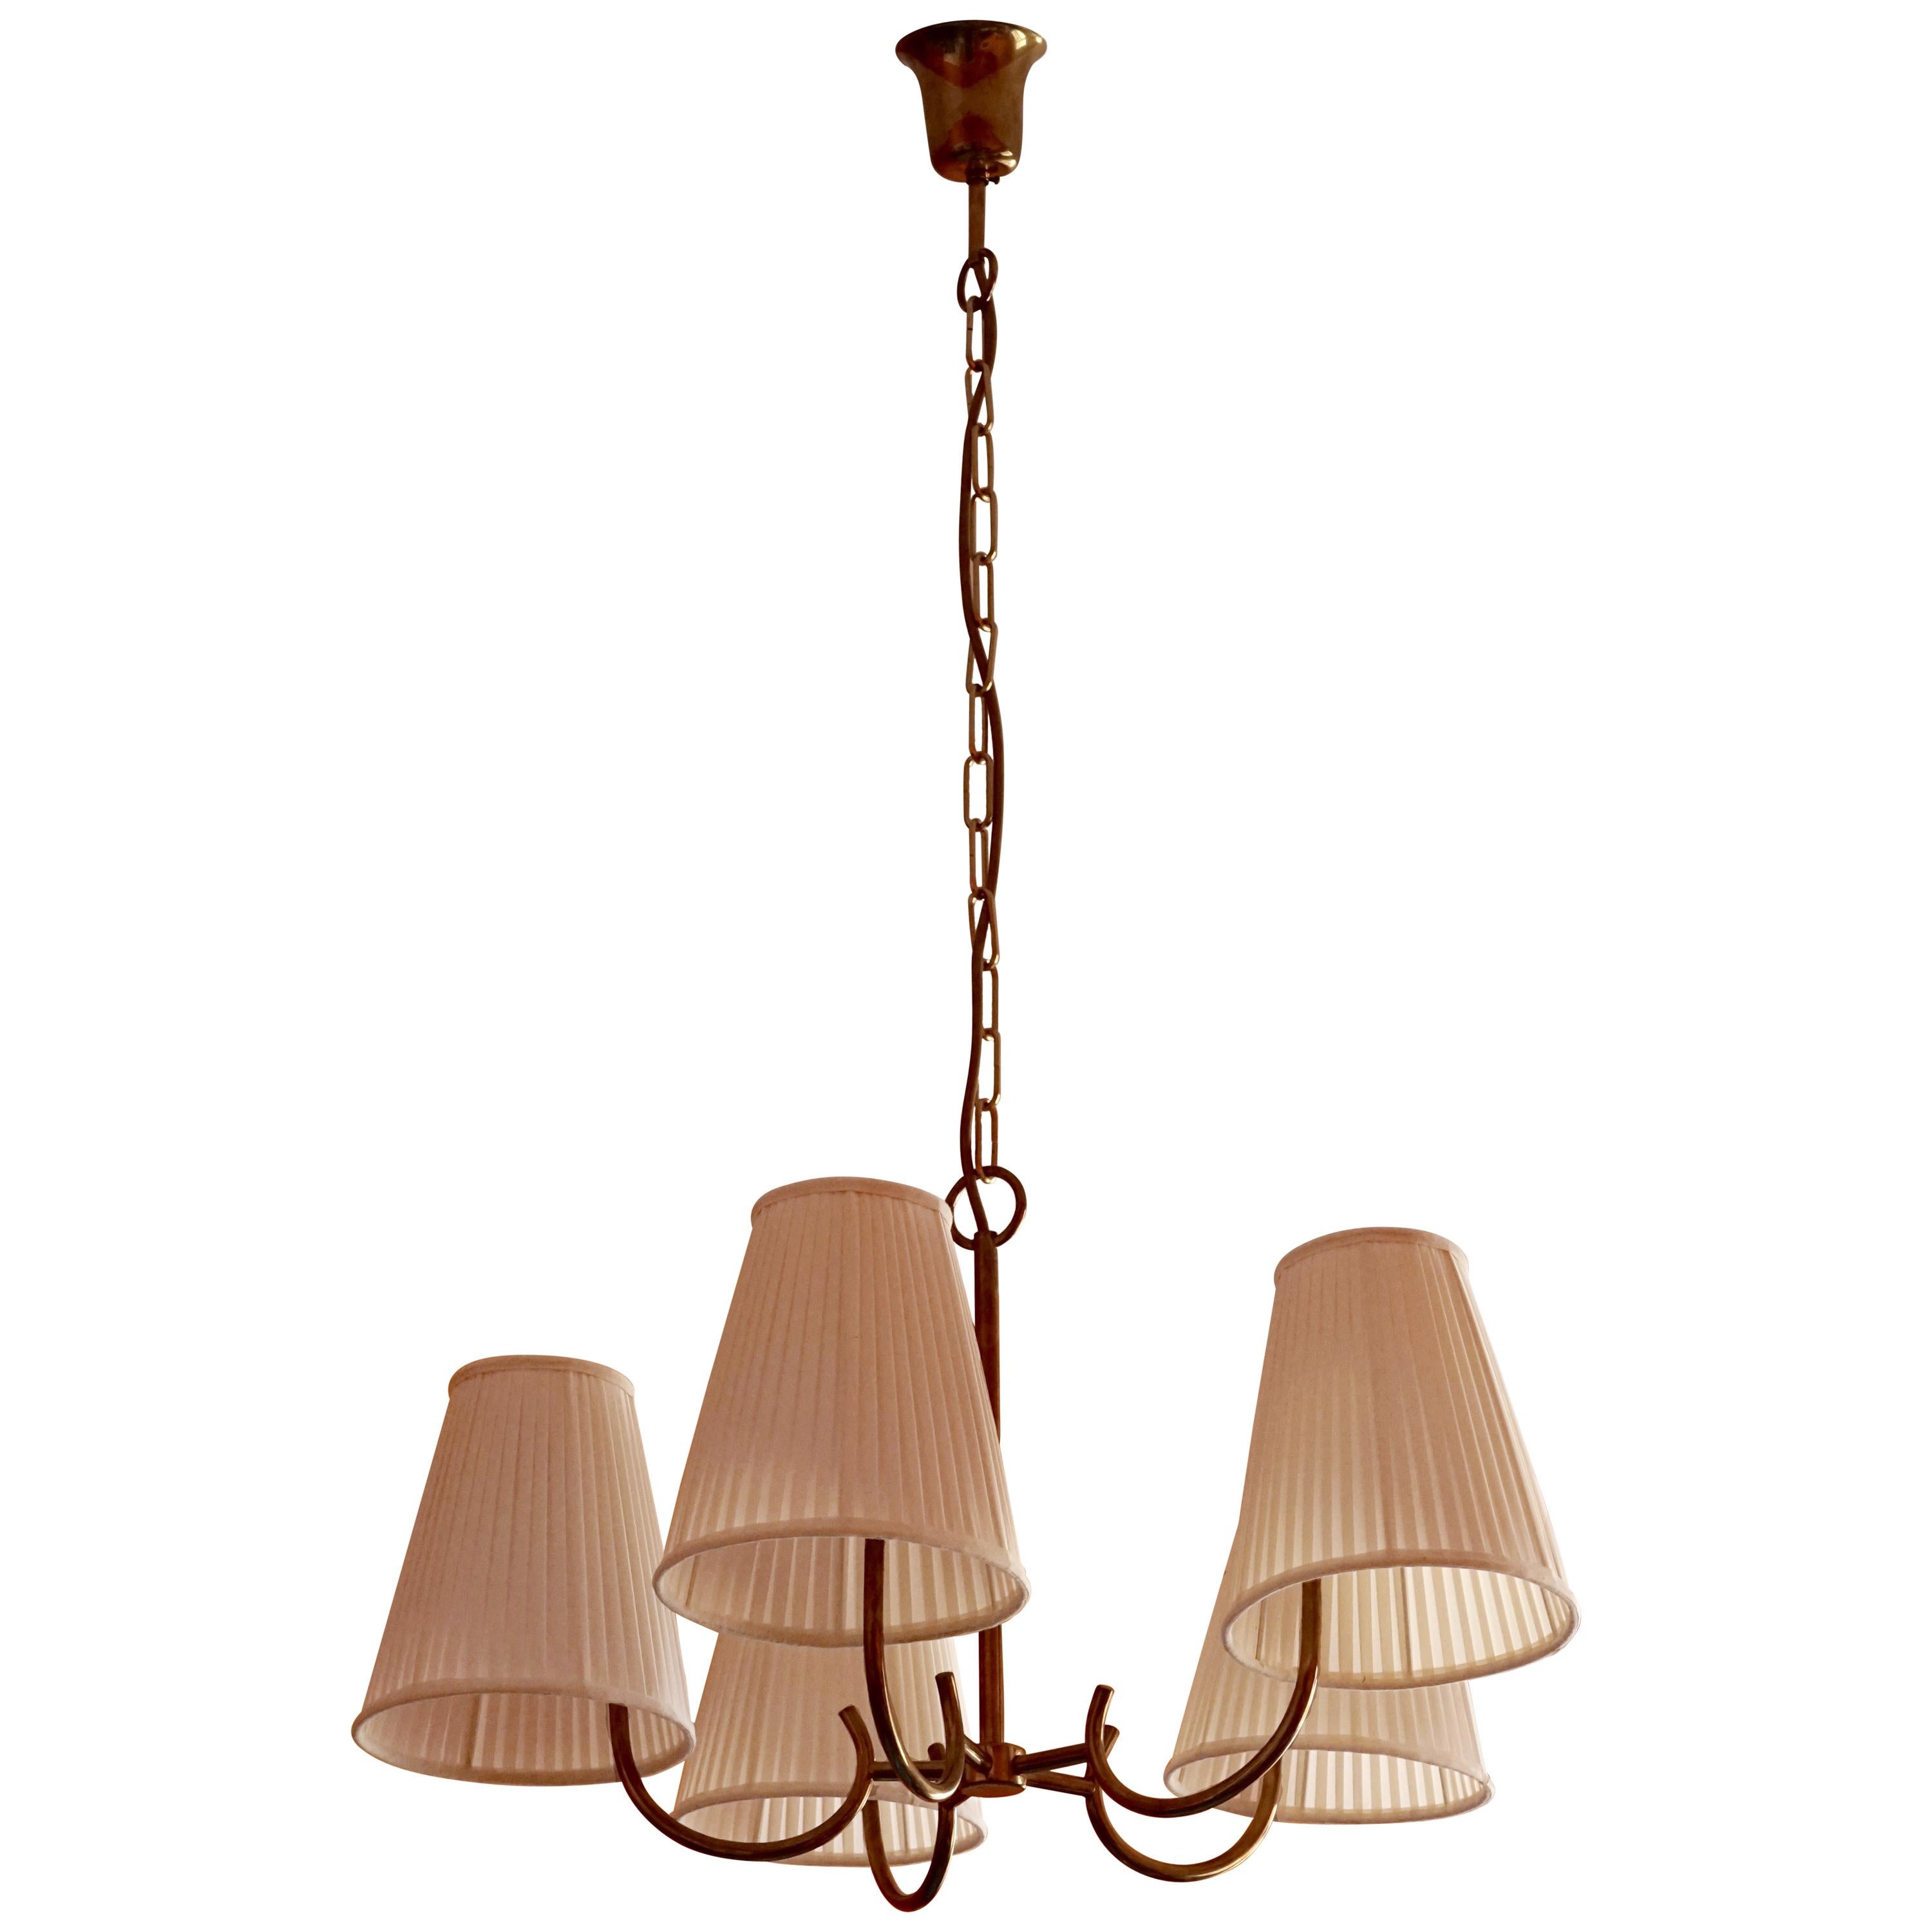 Brass Chandelier with 5 Arms and Silk Shades in Hollywood Regency Style